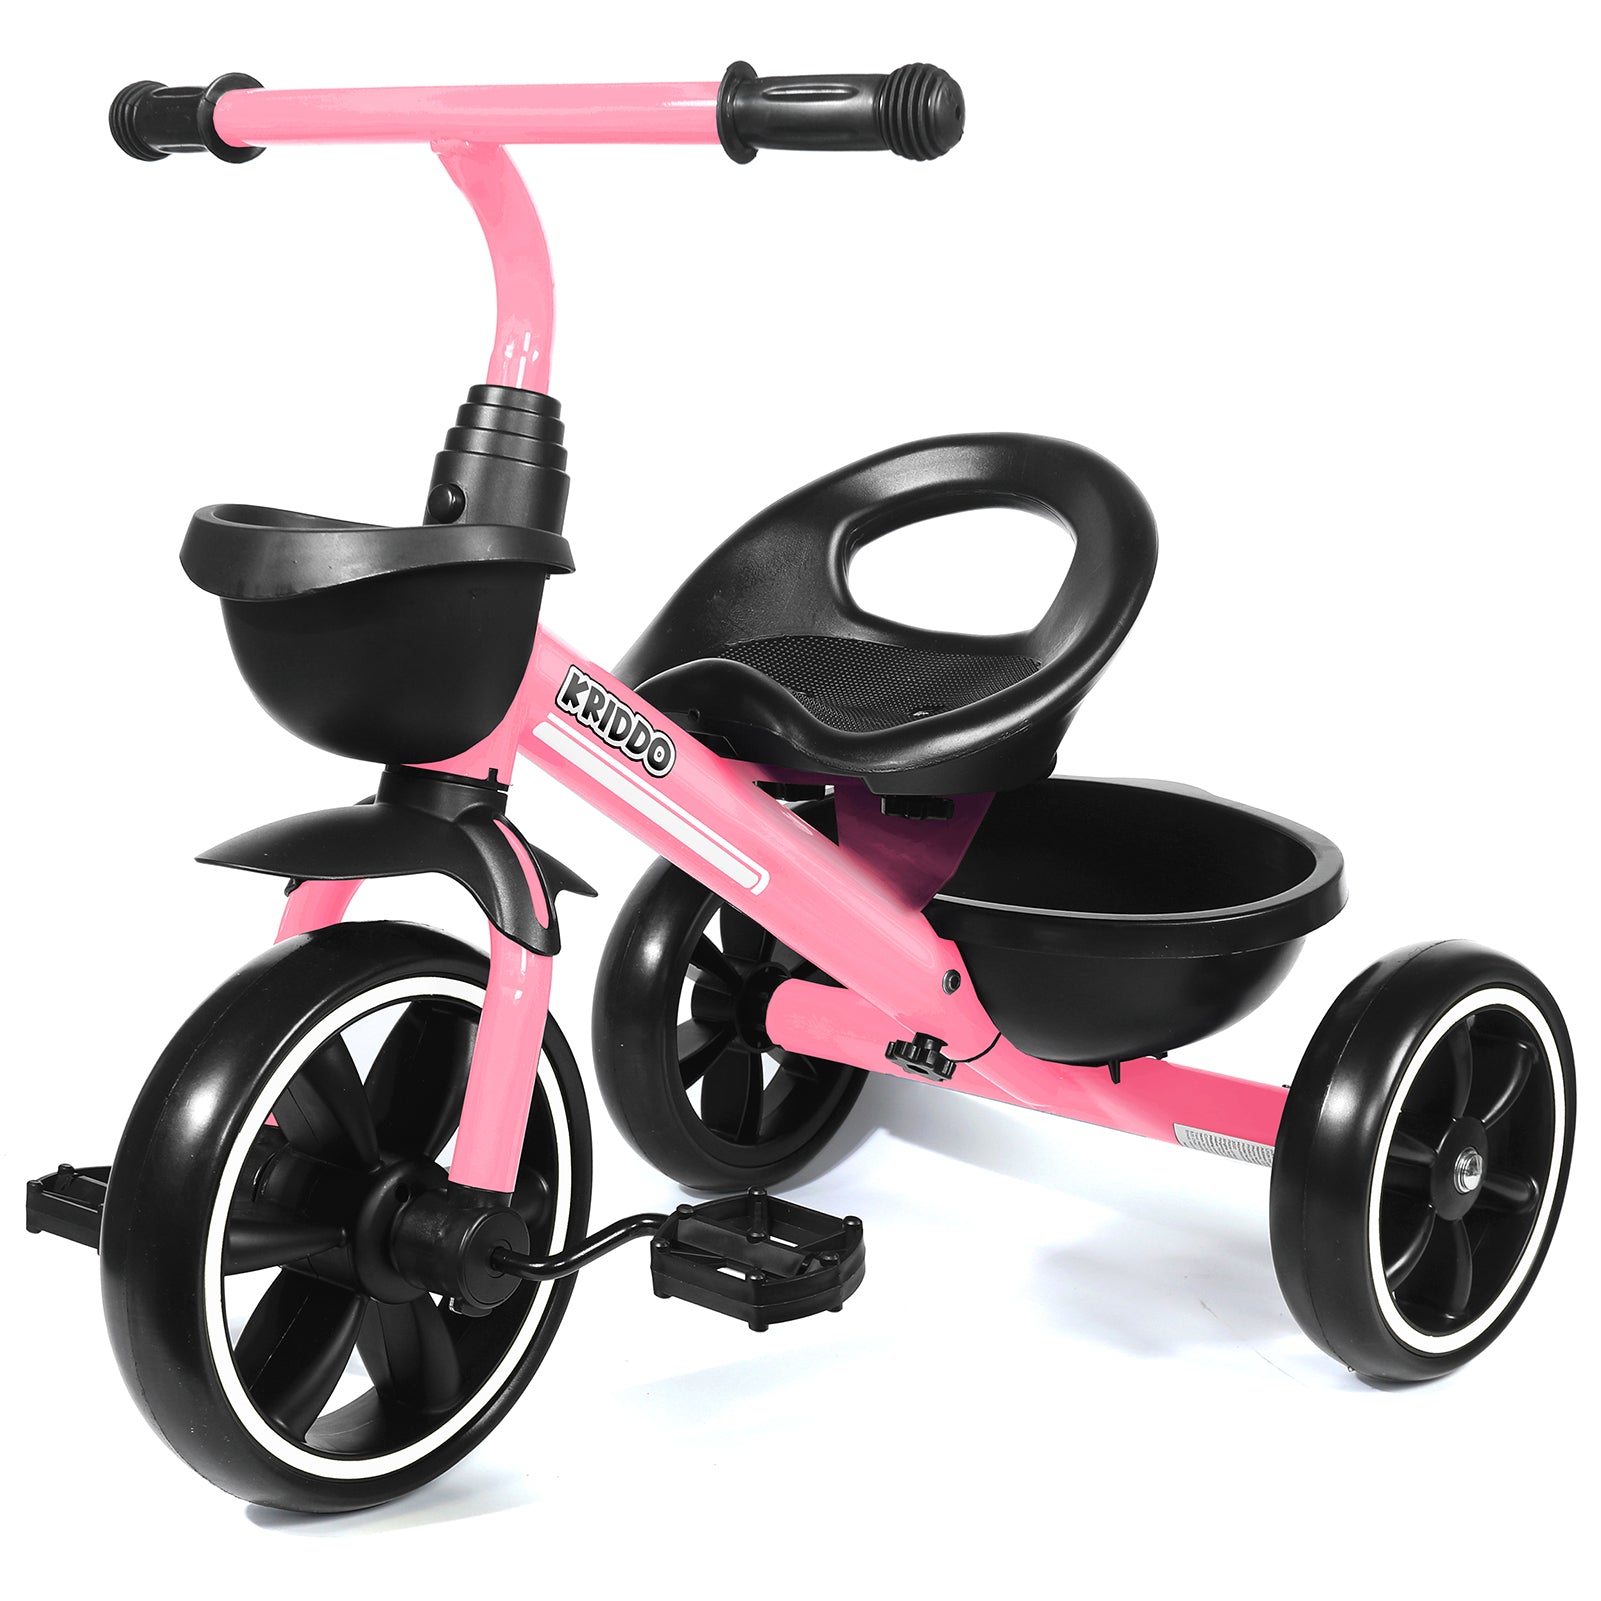 KRIDDO Kids Tricycle 2.5 to 5 Year Old